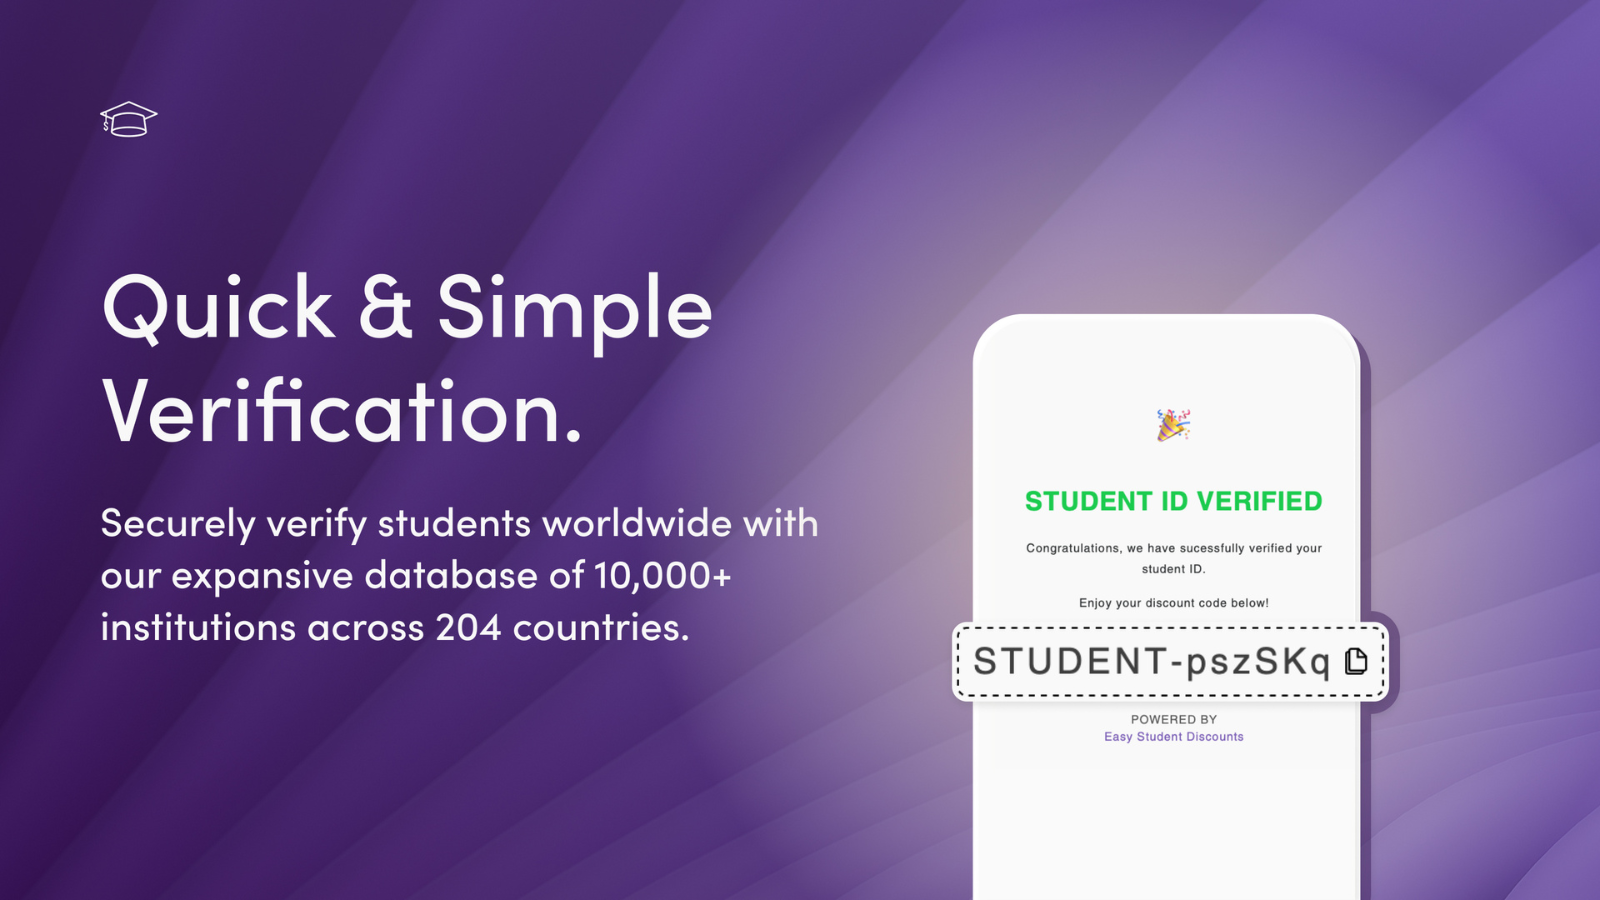 Quick and simple verification of student status